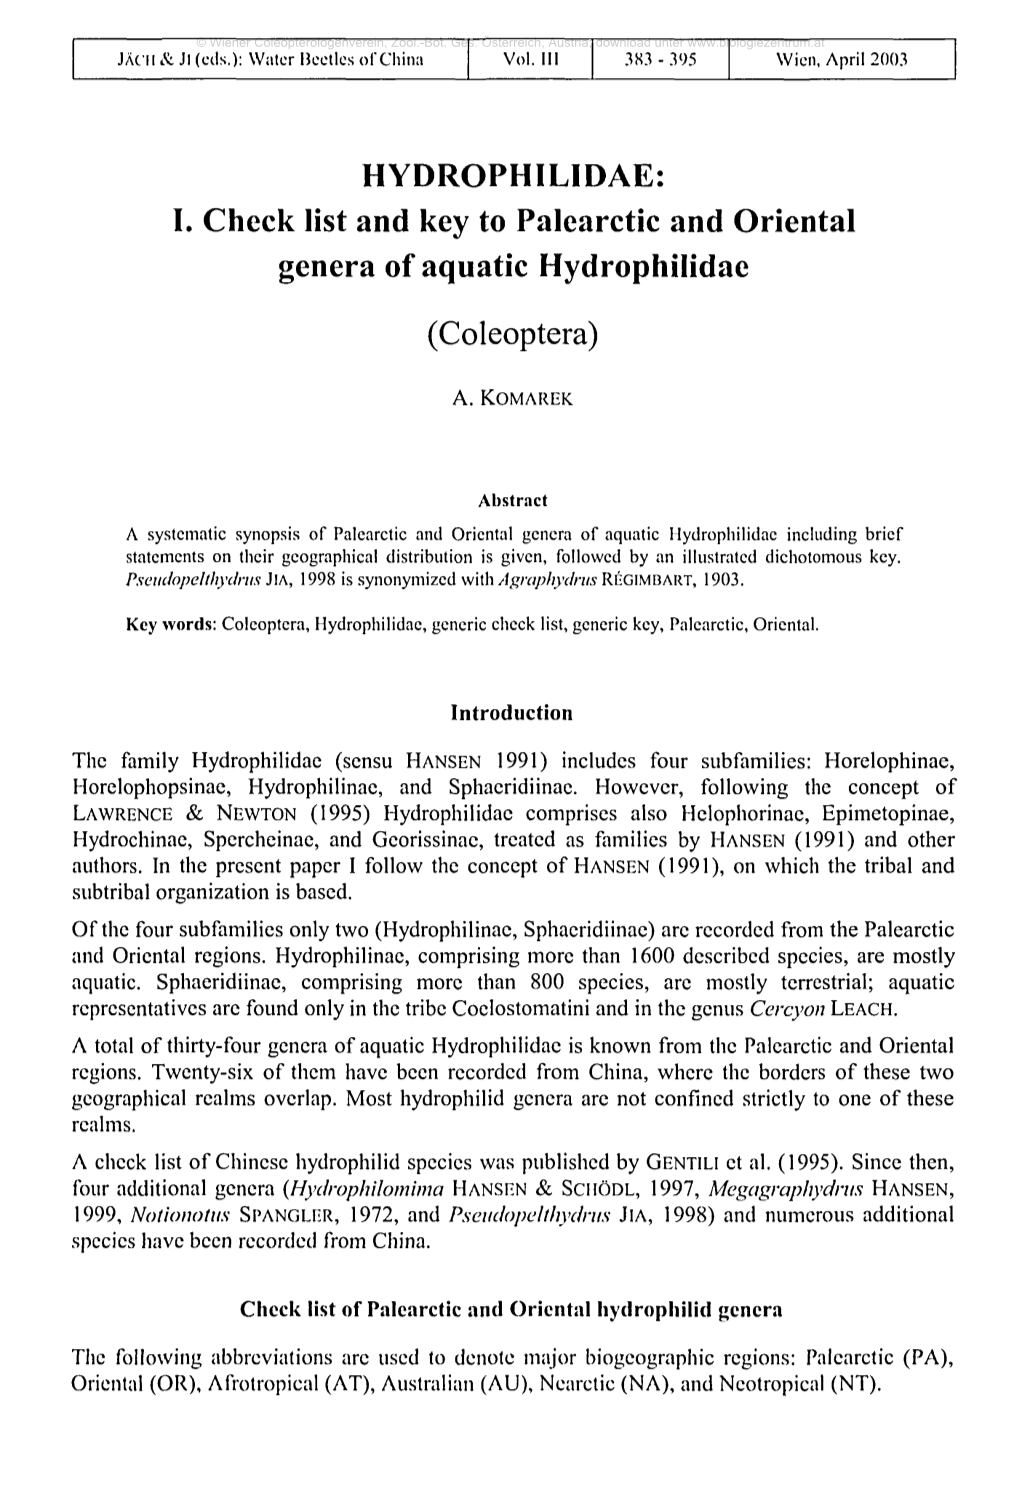 I. Check List and Key to Palearctic and Oriental Genera of Aquatic Hydrophilidae (Coleoptera)